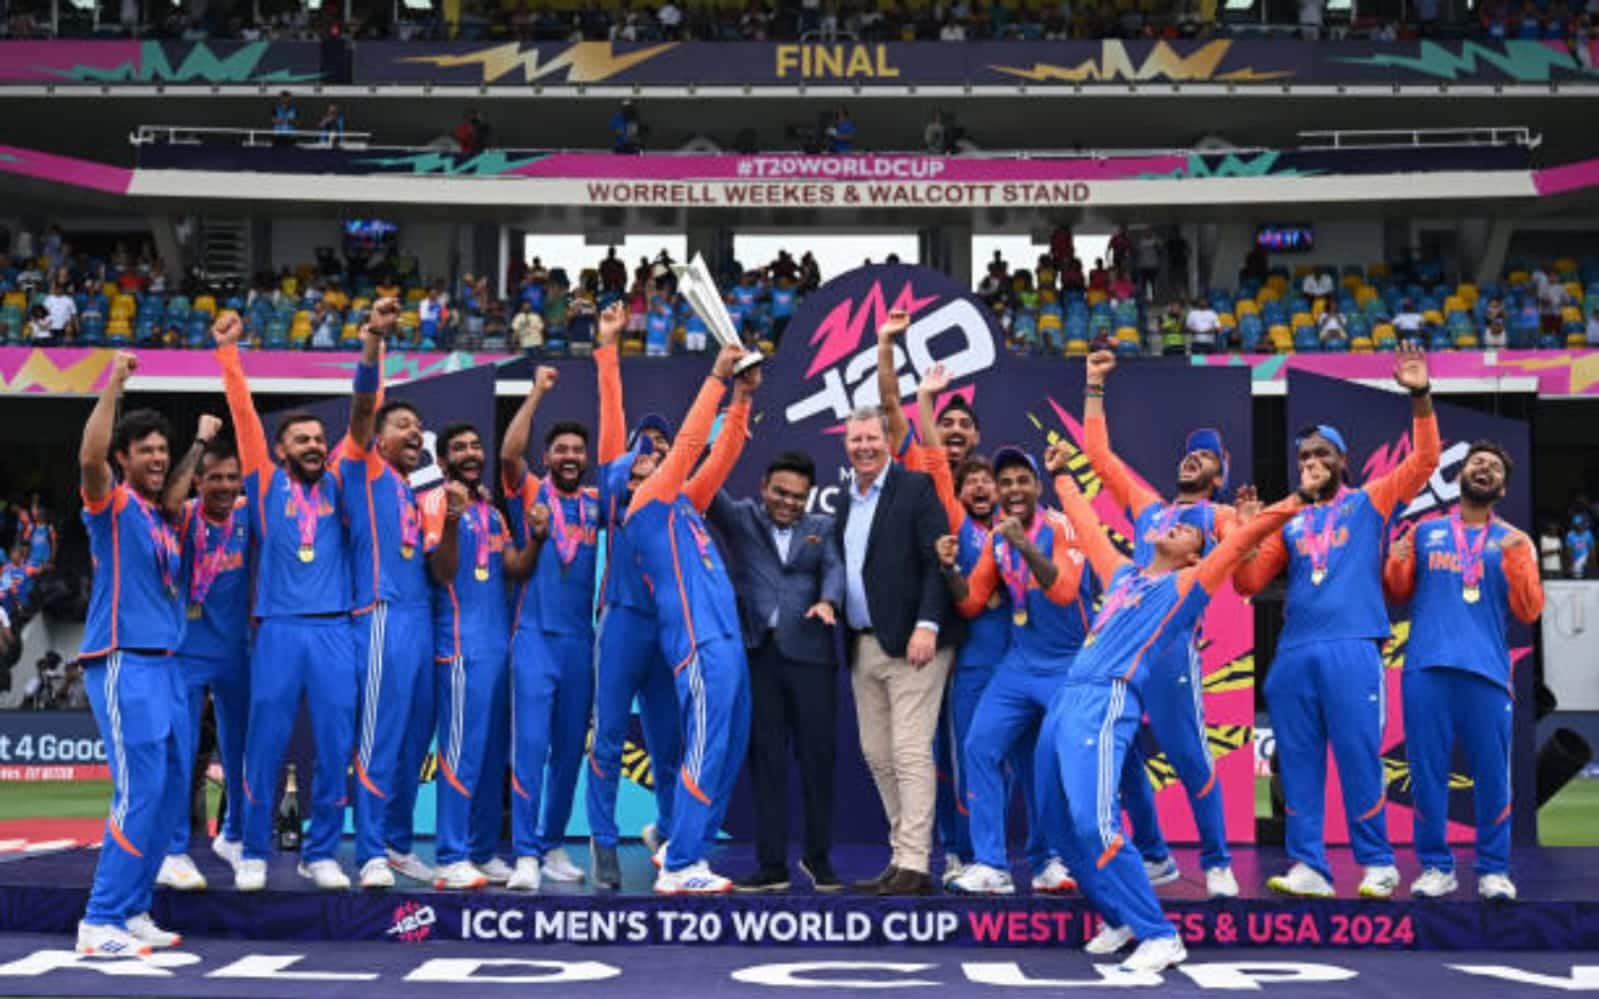 India defeated South Africa by 7 runs in the final of the T20 World Cup [ICC]